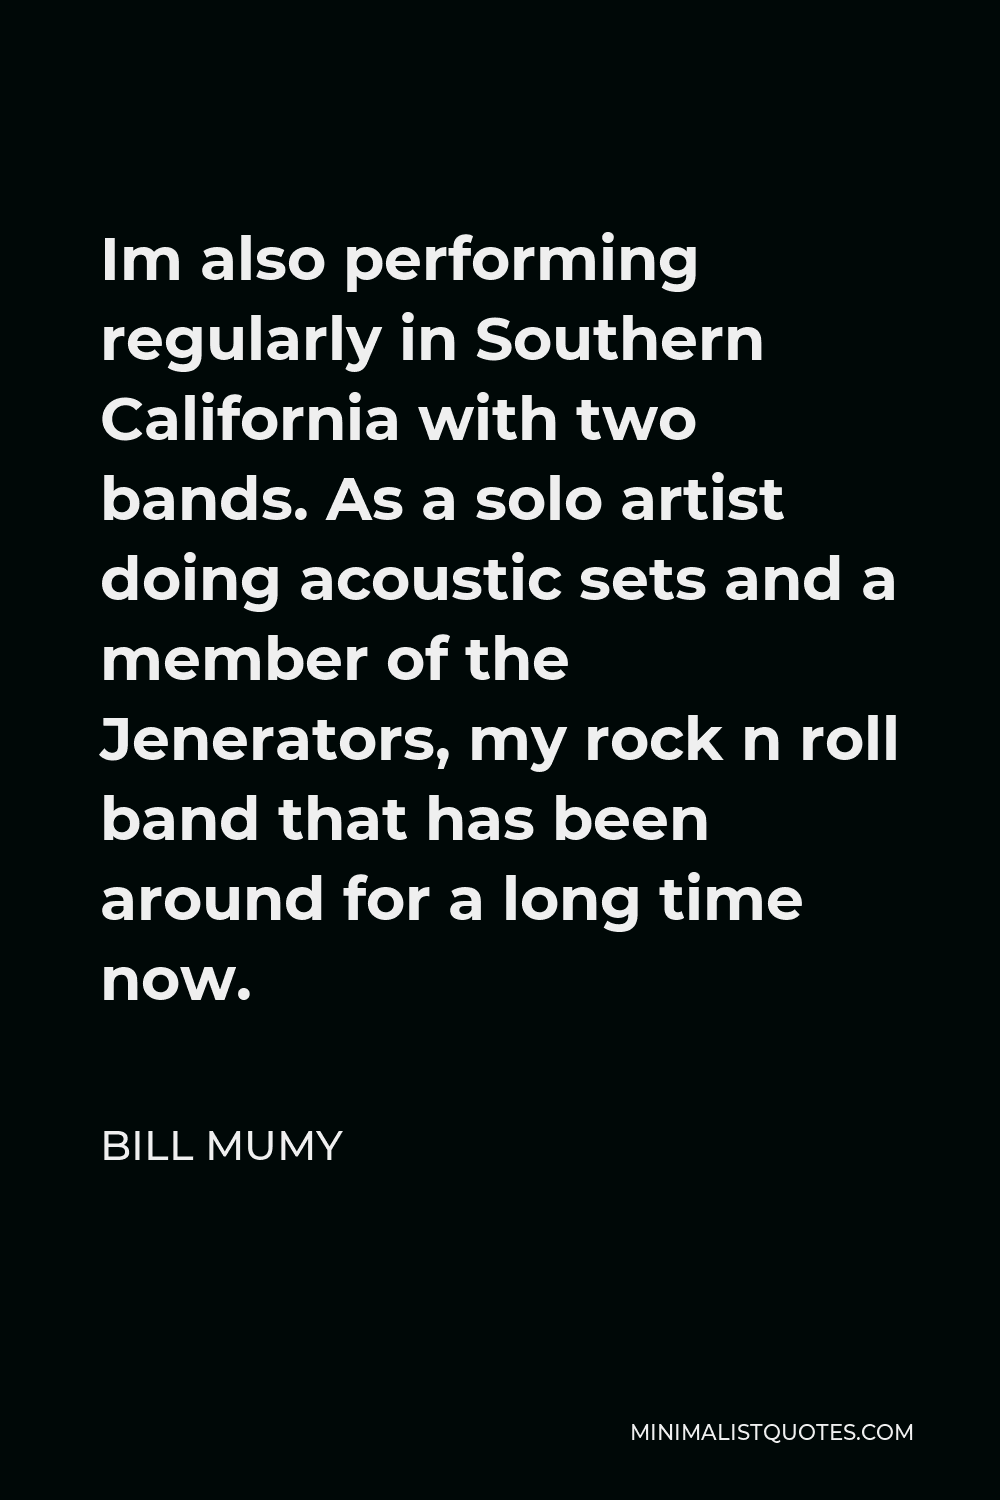 Bill Mumy Quote - Im also performing regularly in Southern California with two bands. As a solo artist doing acoustic sets and a member of the Jenerators, my rock n roll band that has been around for a long time now.